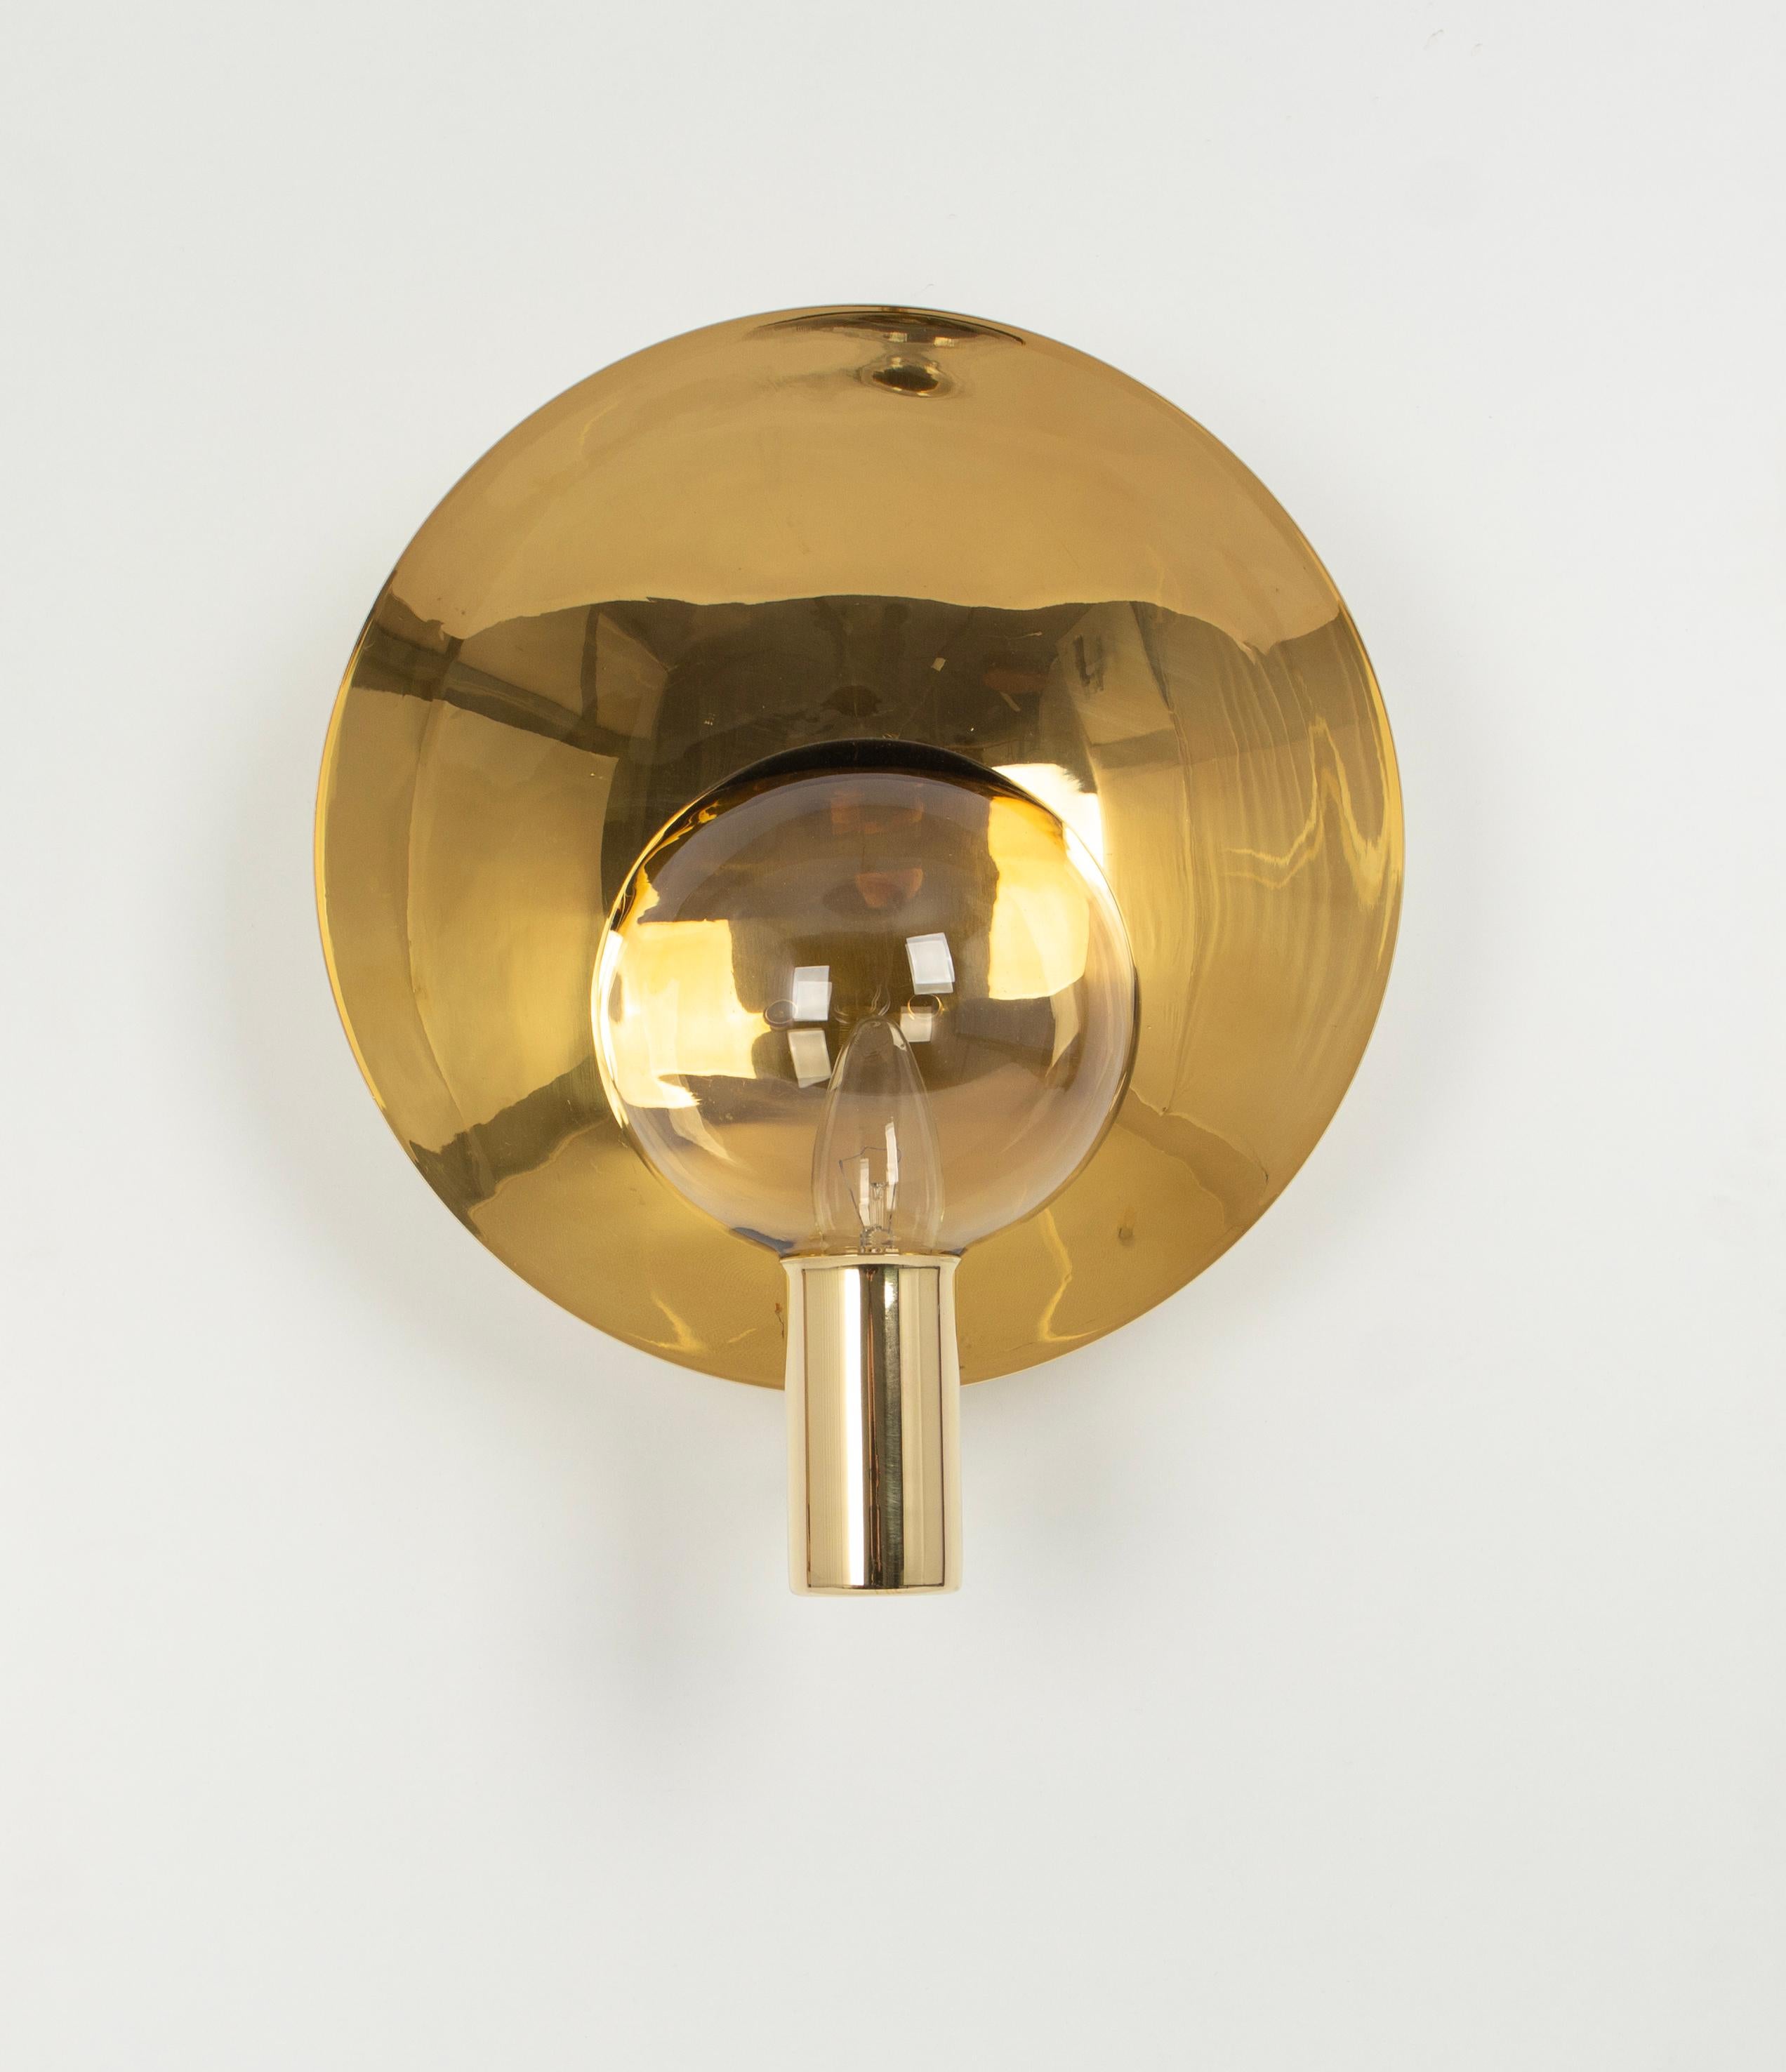 Stunning Large Brass and Smoke Glass Sconce, Hans Agne jakobsson, Sweden, 1970s
The sconce is composed of one smoked glass with a brass base.

High quality and in very good condition. Cleaned, well-wired, and ready to use. 
The sconce requires 1 x